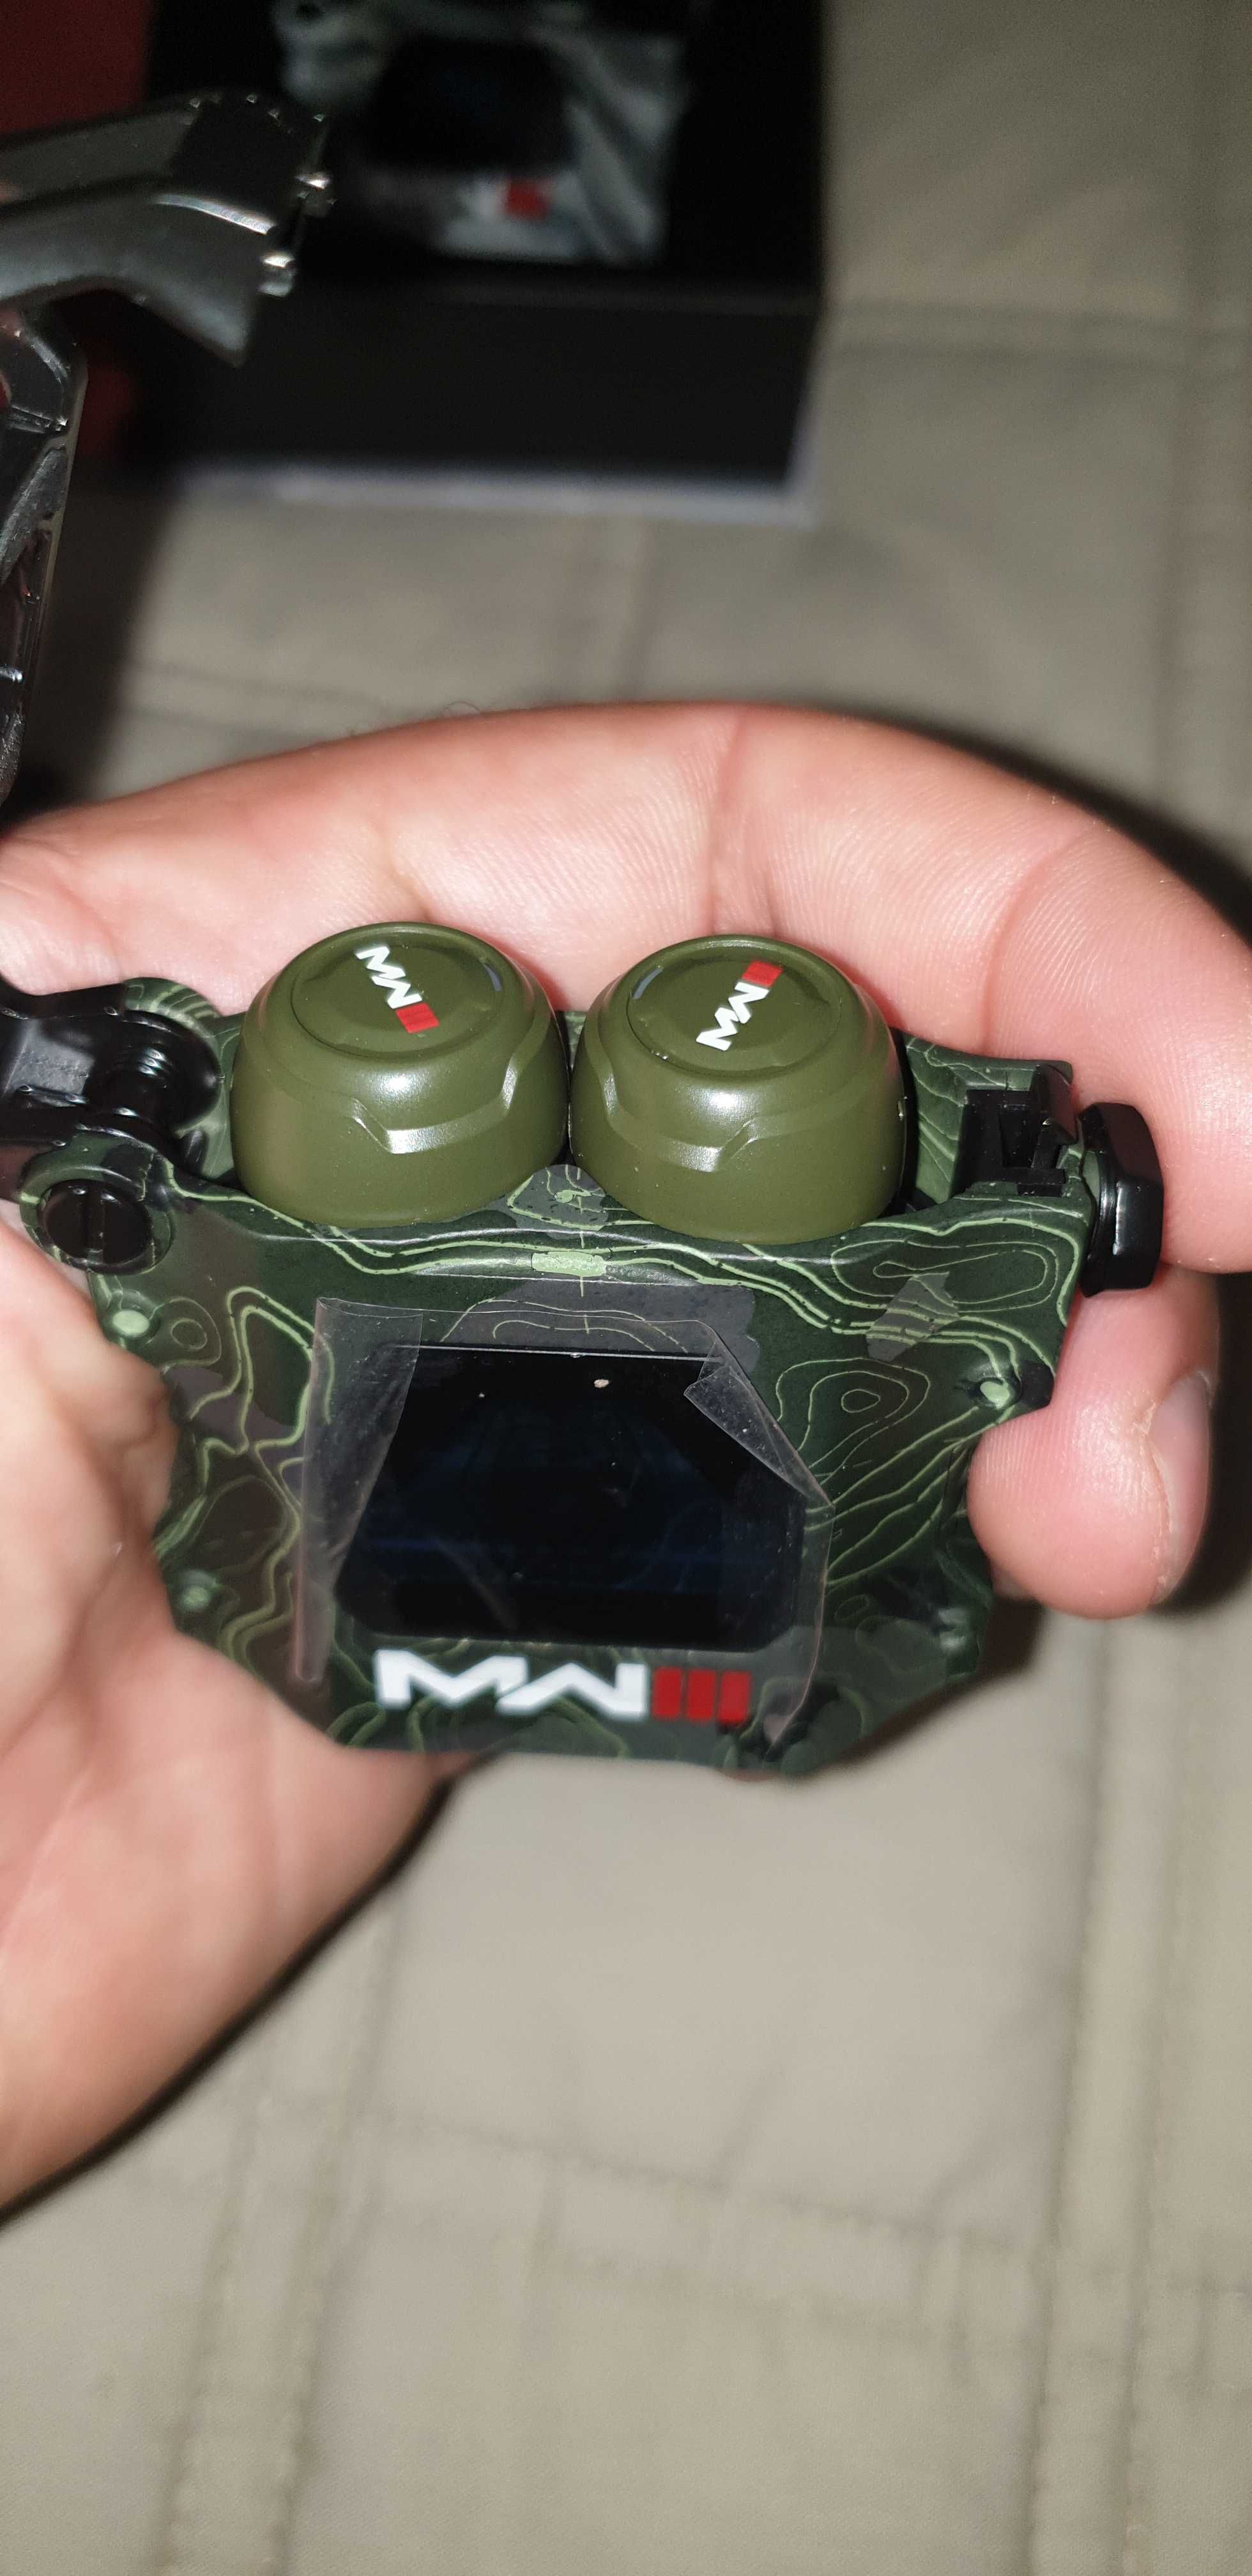 Call of duty earbuds